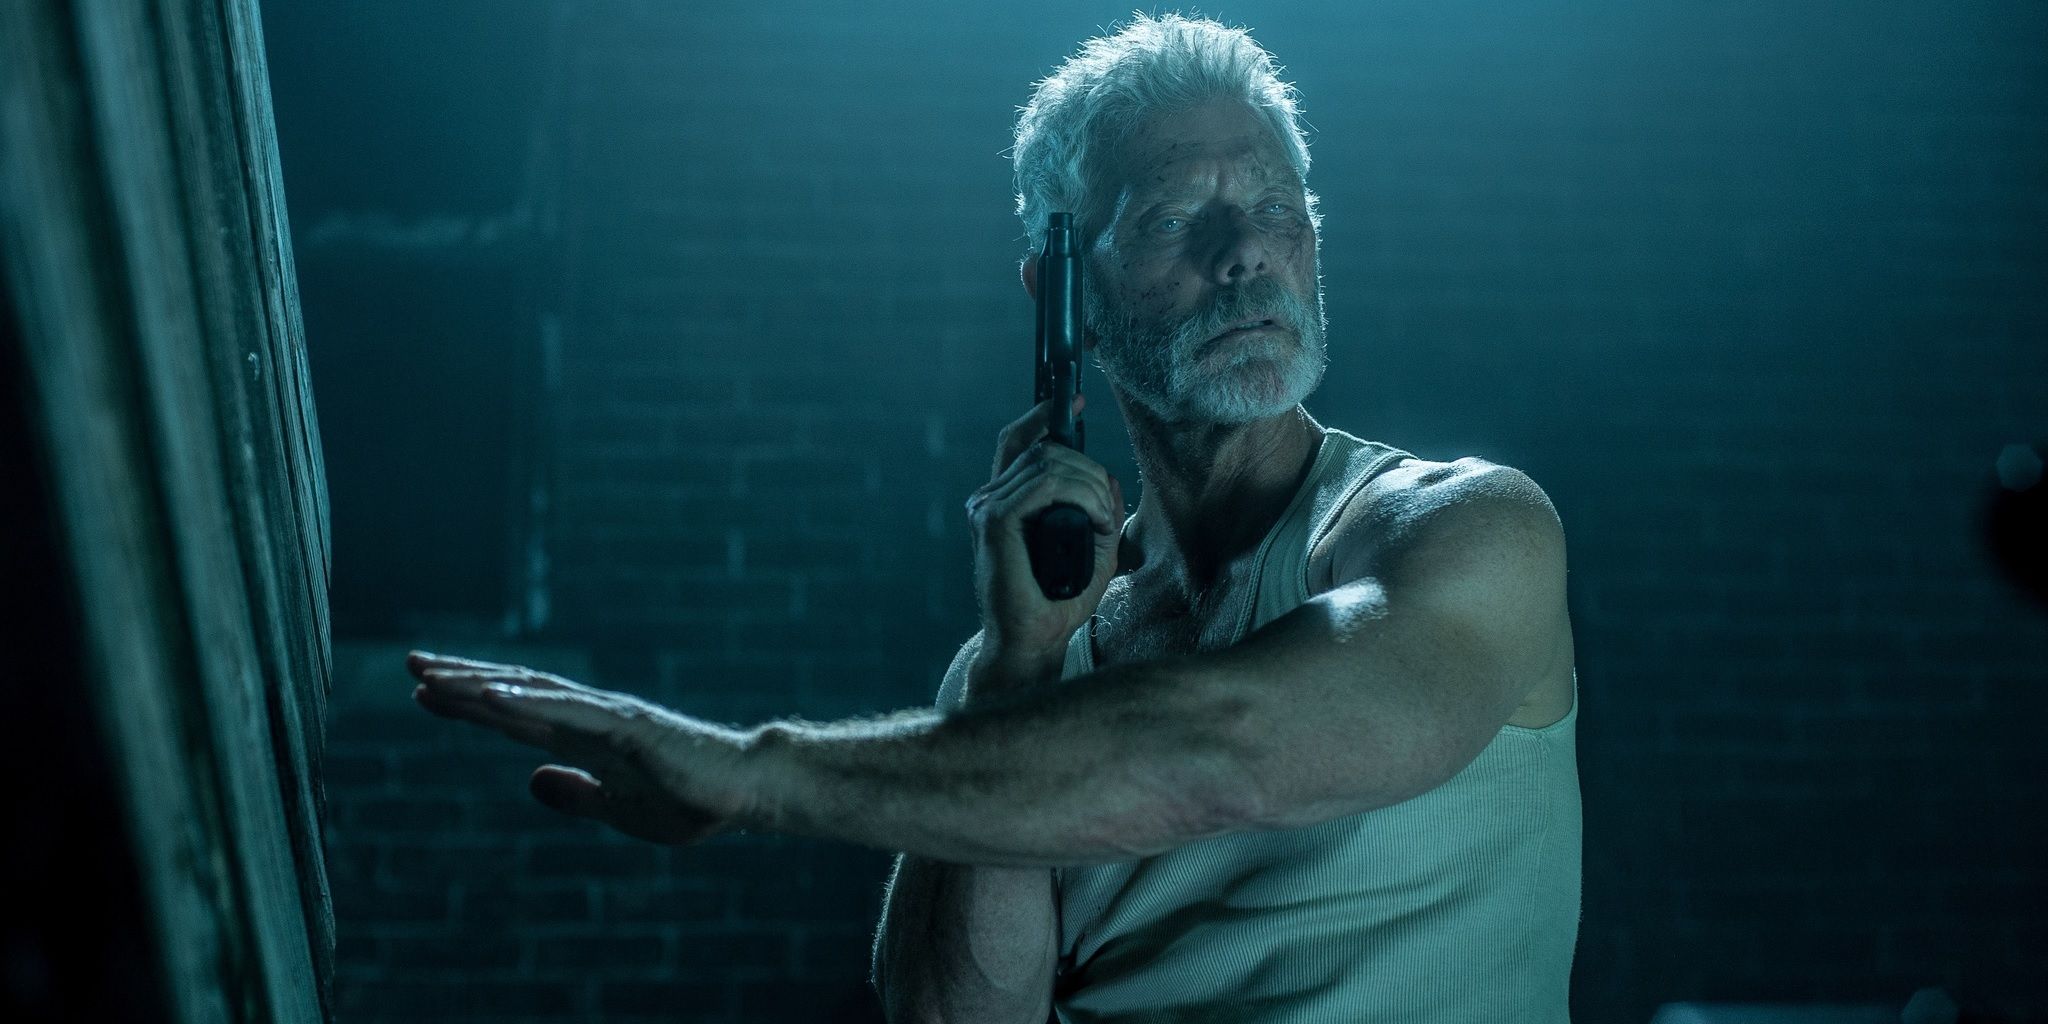 Stephen Lang as the Blind Man in Don't Breathe